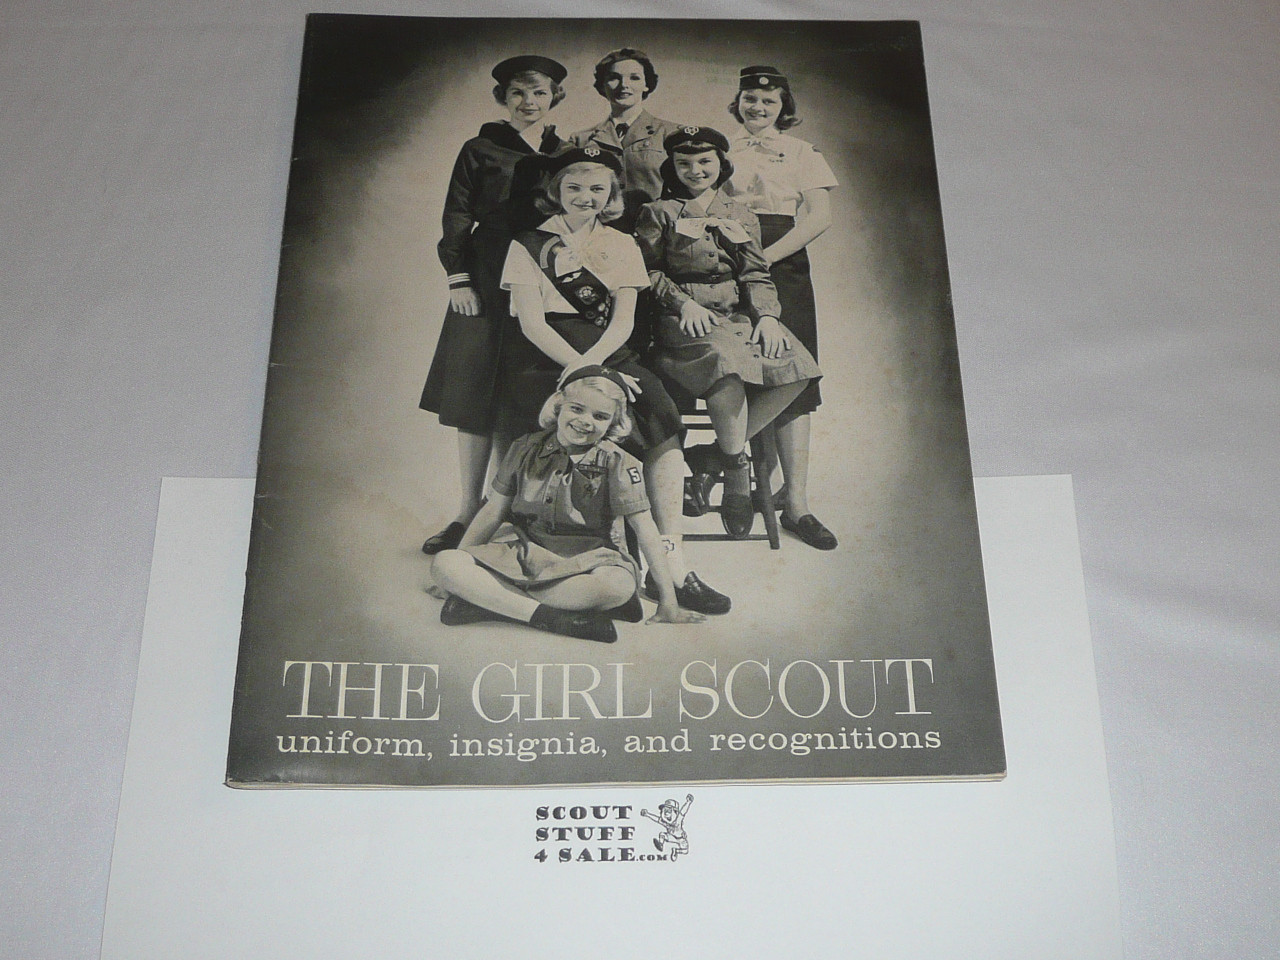 Girl Scout Uniform, Insignia and Recognitions, July 1958